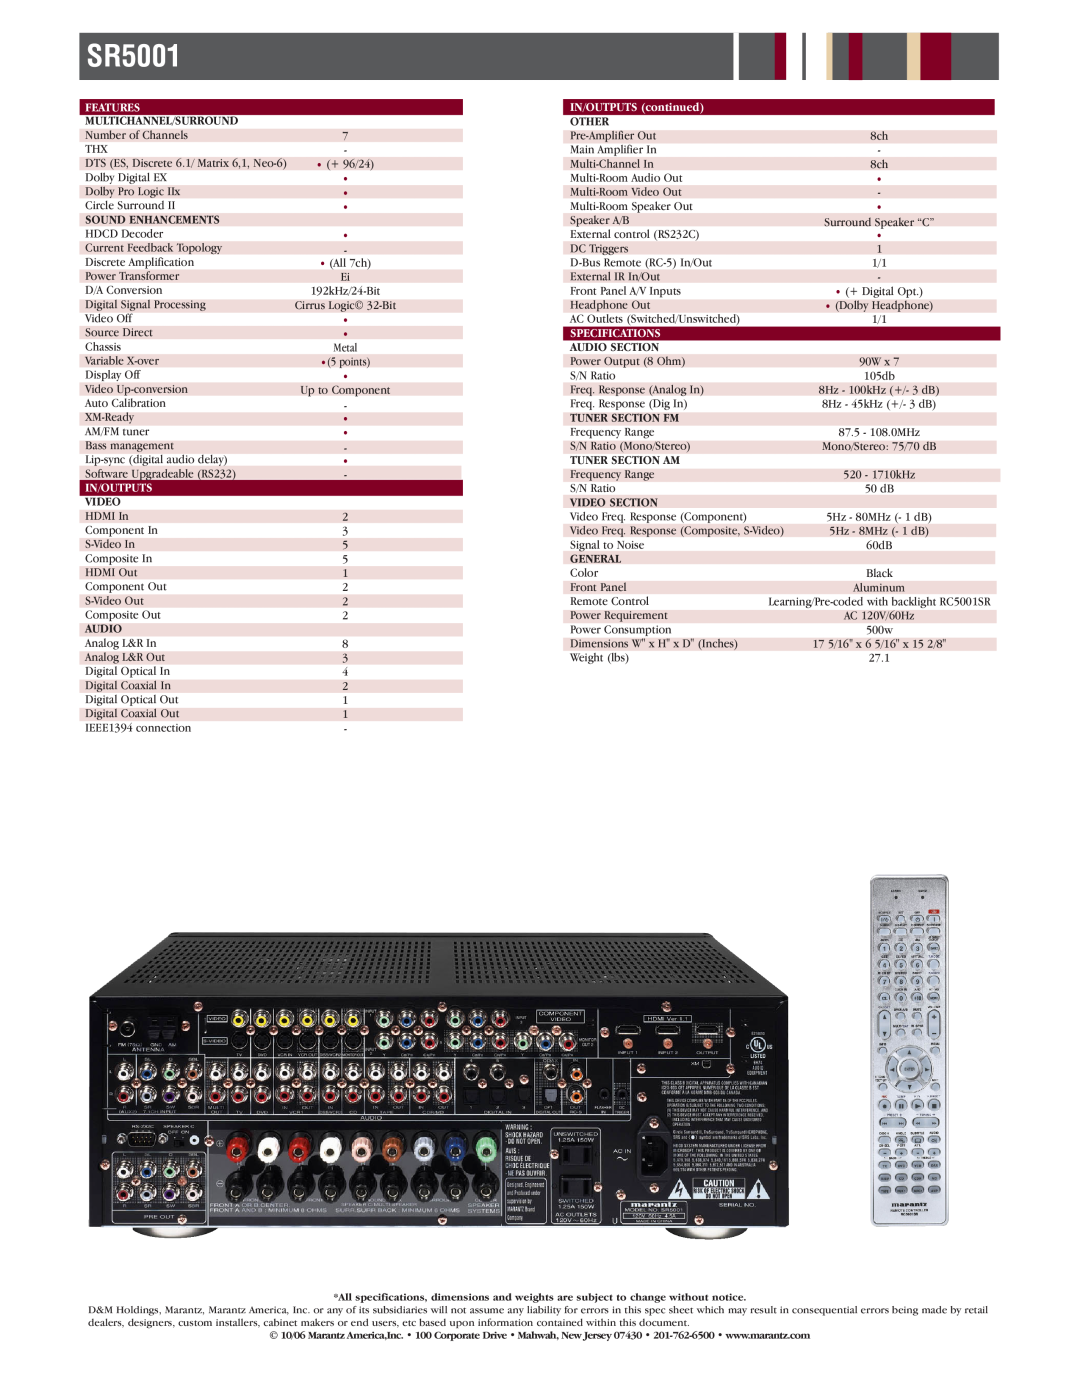 Marantz SR-5001 warranty SR5001, Features, In/Outputs, IN/OUTPUTS continued, Specifications 